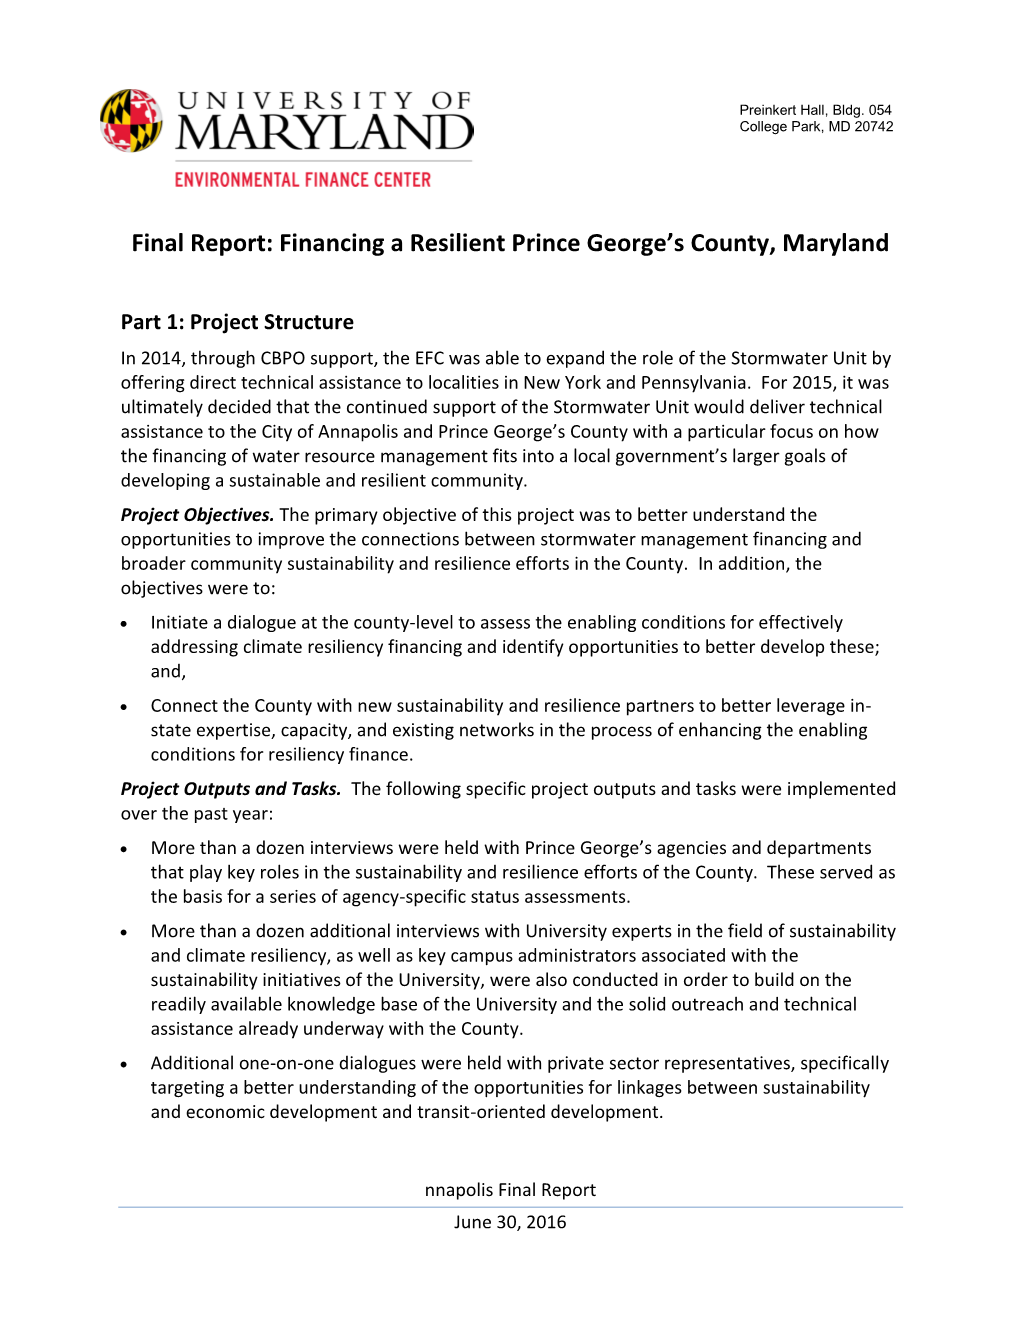 Final Report: Financing a Resilient Prince George’S County, Maryland